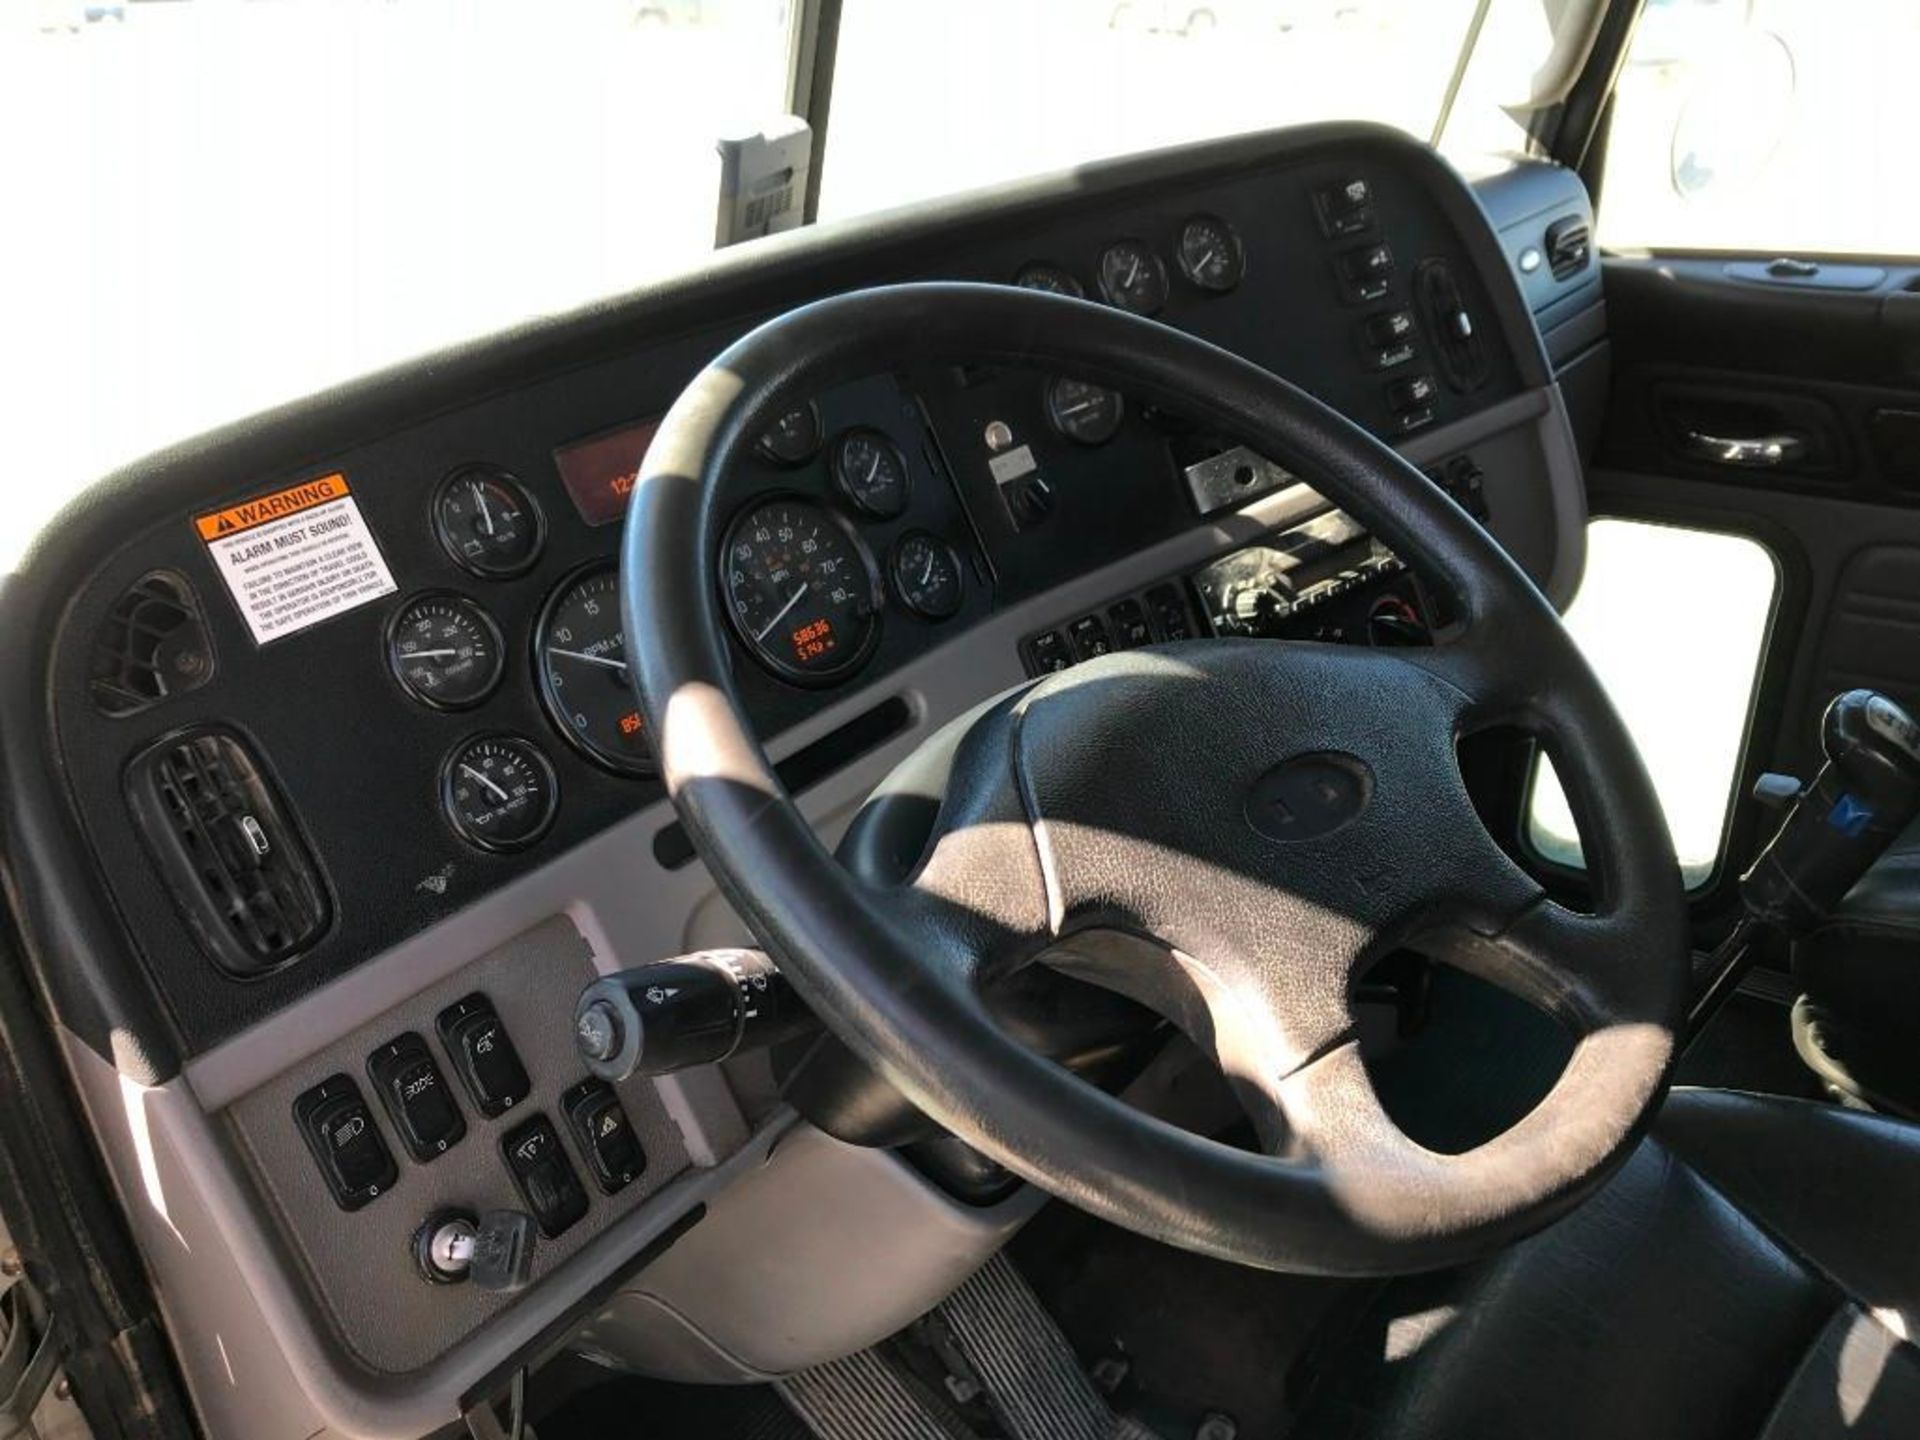 2013 Peterbilt 367 T/A Sleeper Road Tractor (Unit #TRS-210) - Image 10 of 26